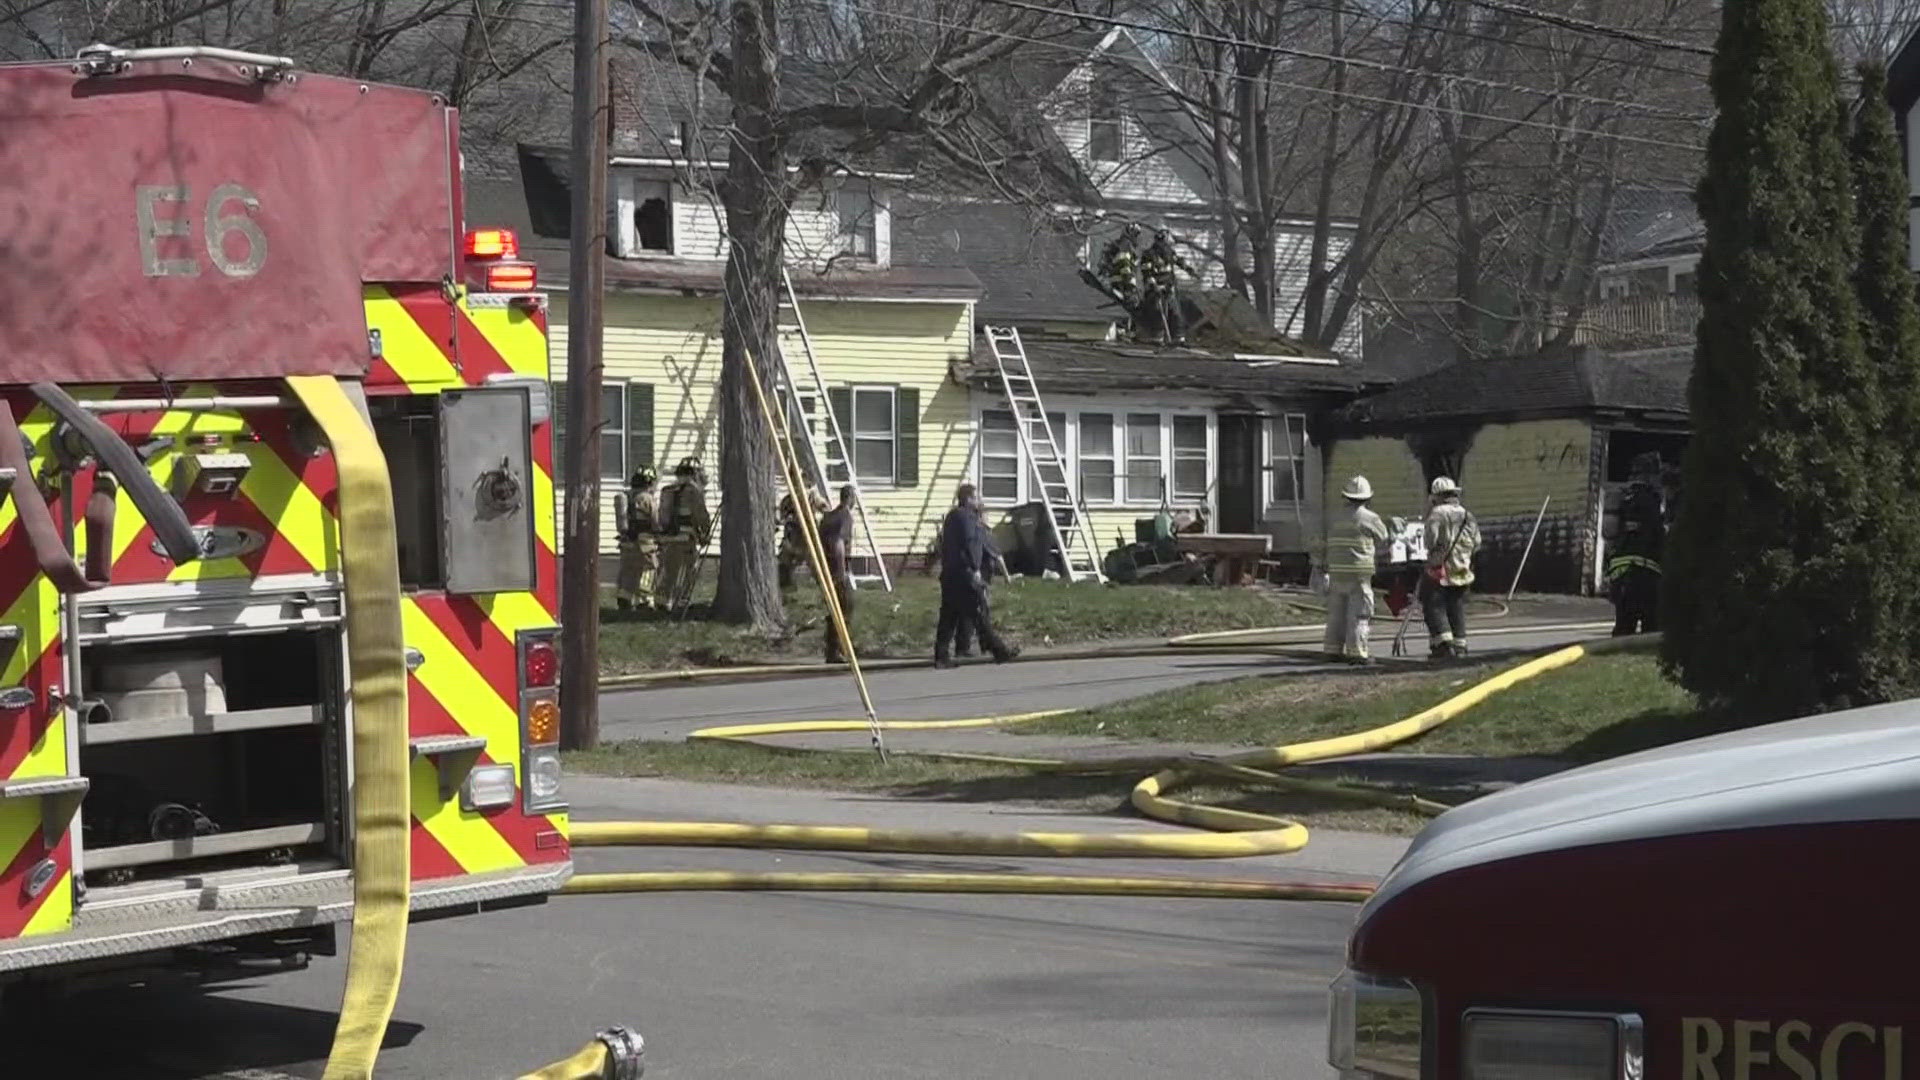 A fire destroyed the home of two older Mainers in Bangor on Saturday.